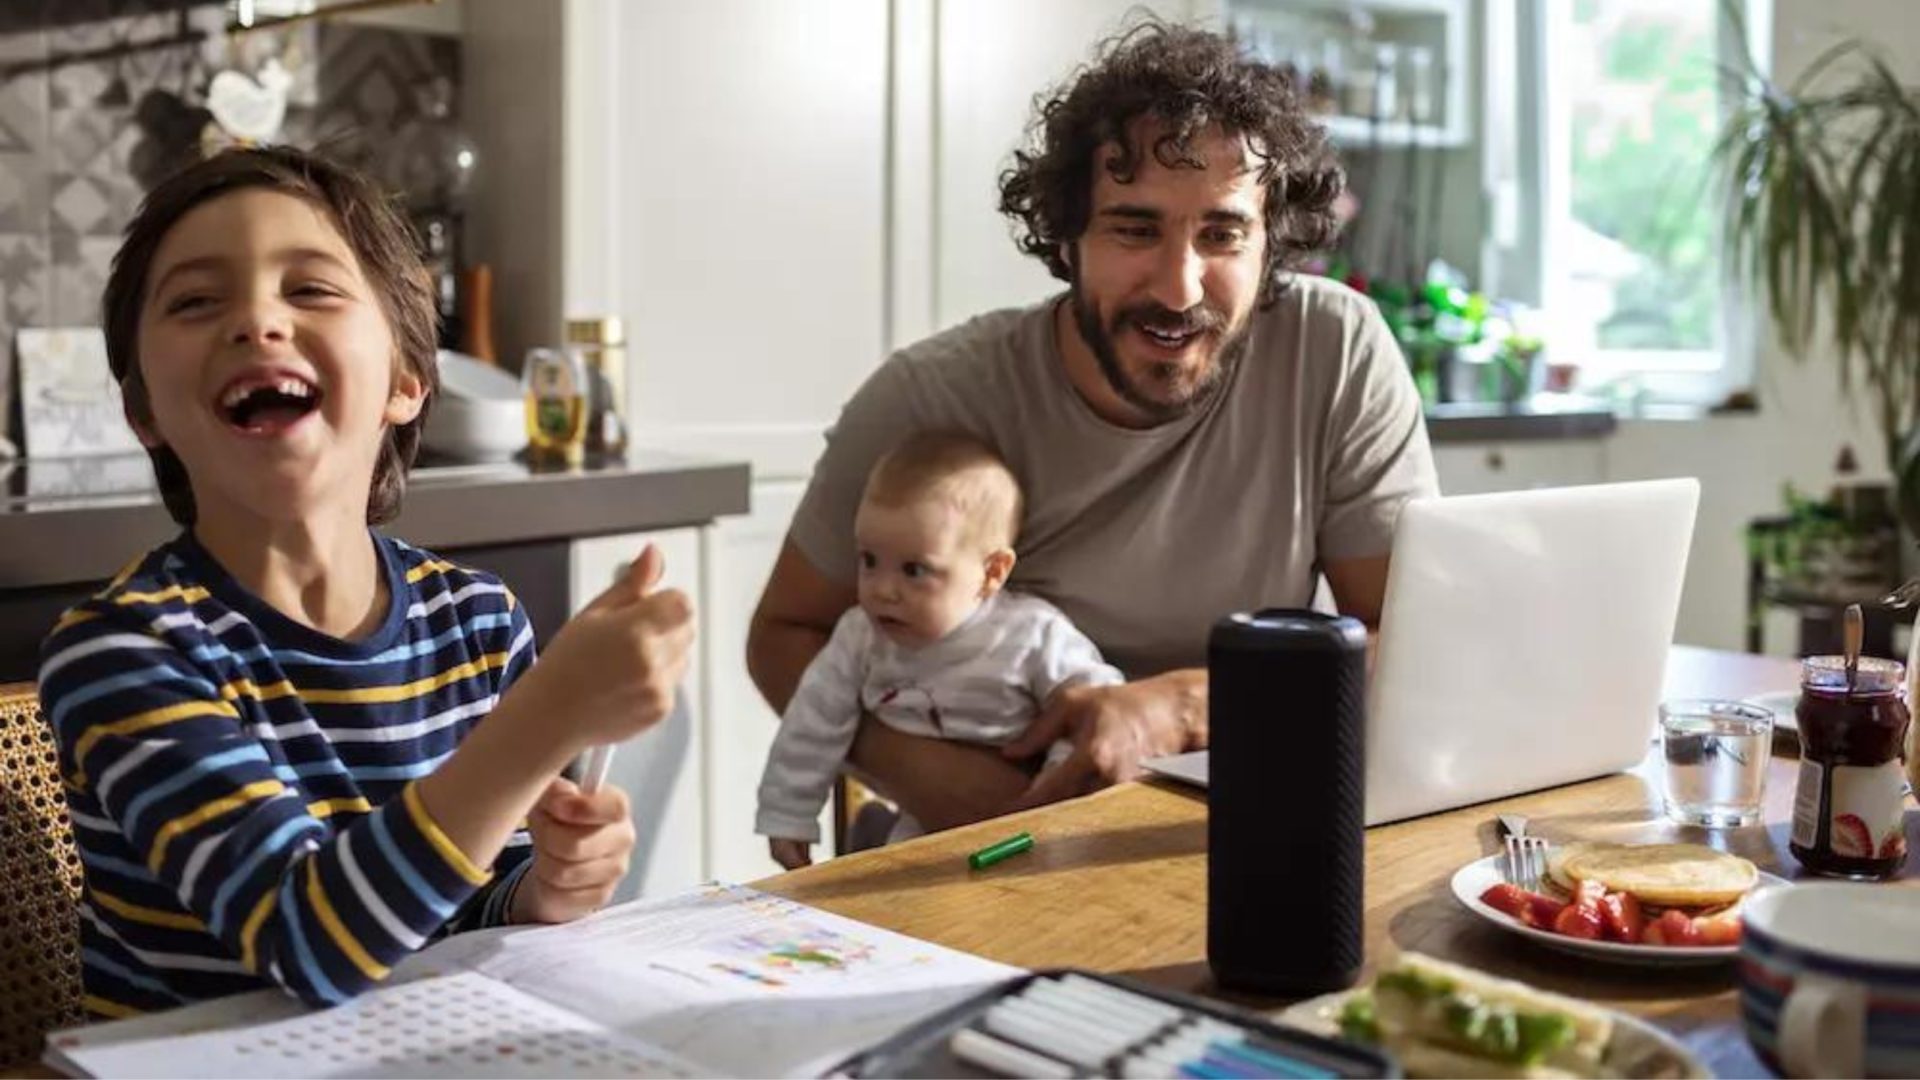 A photo of a dad, his young son, and baby sitting at a kitchen table talking to a smart speaker.